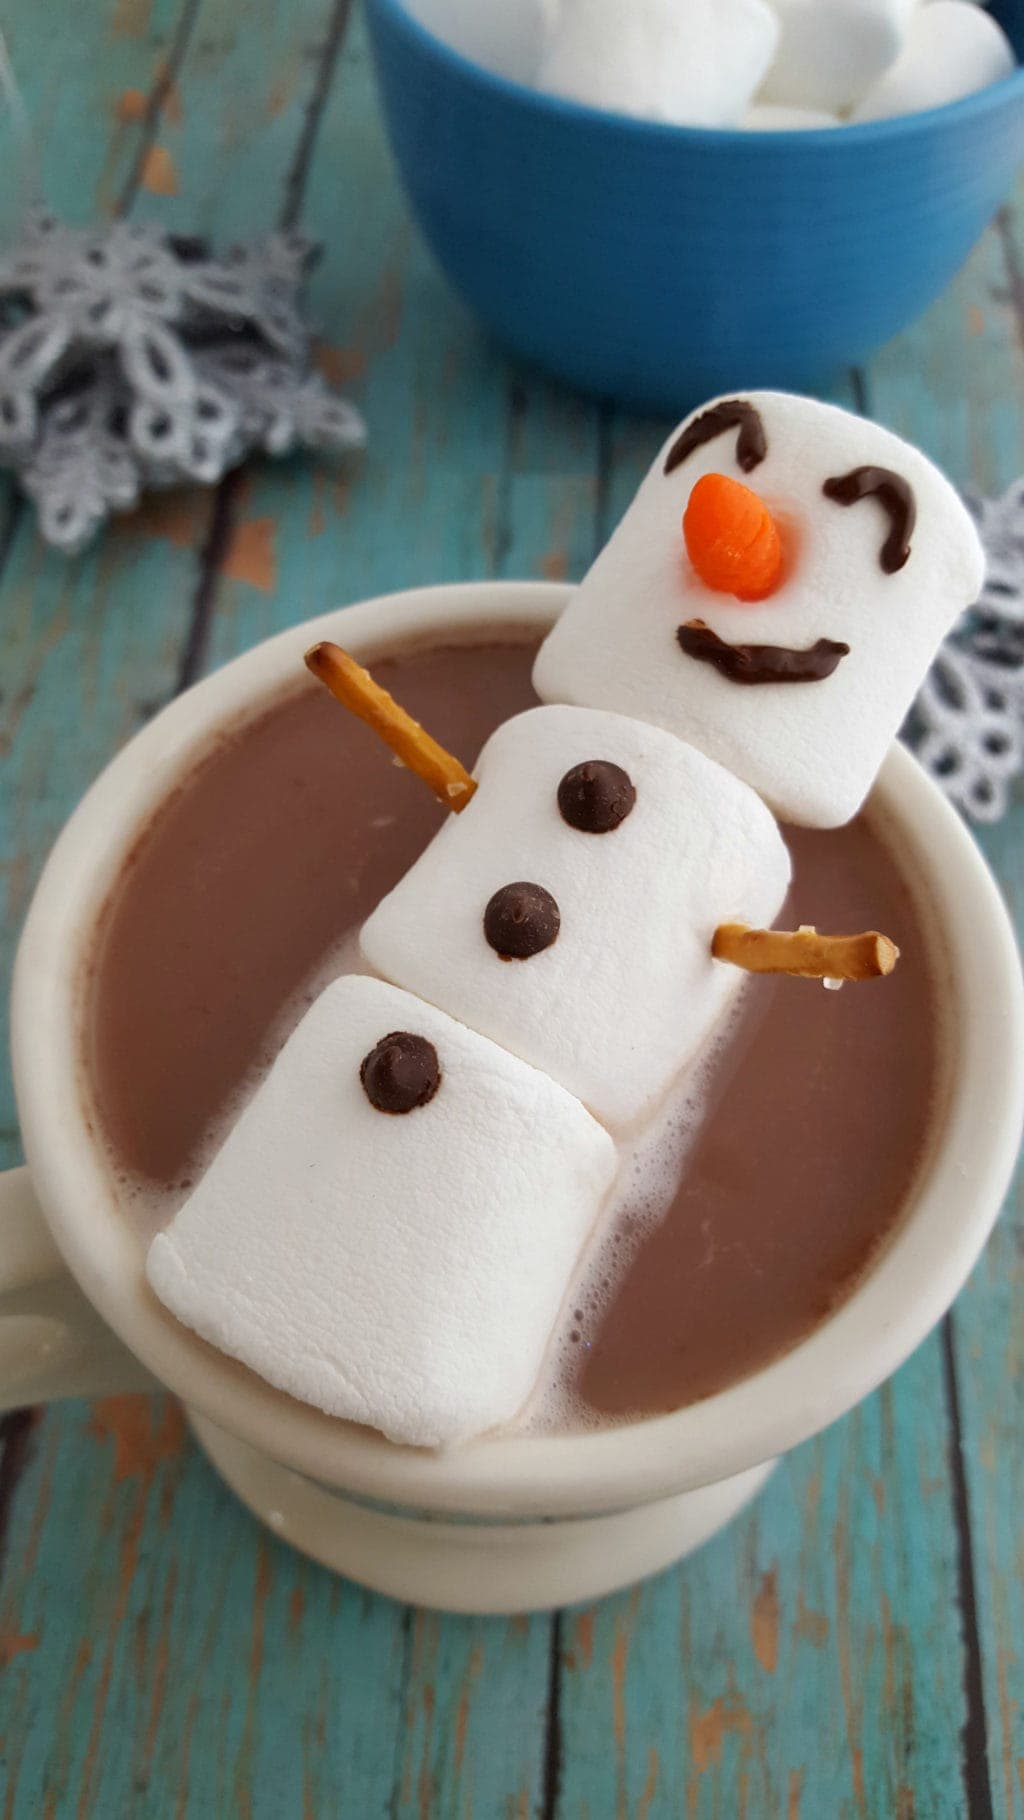 How to Make Marshmallow Snowman for Hot Chocolate